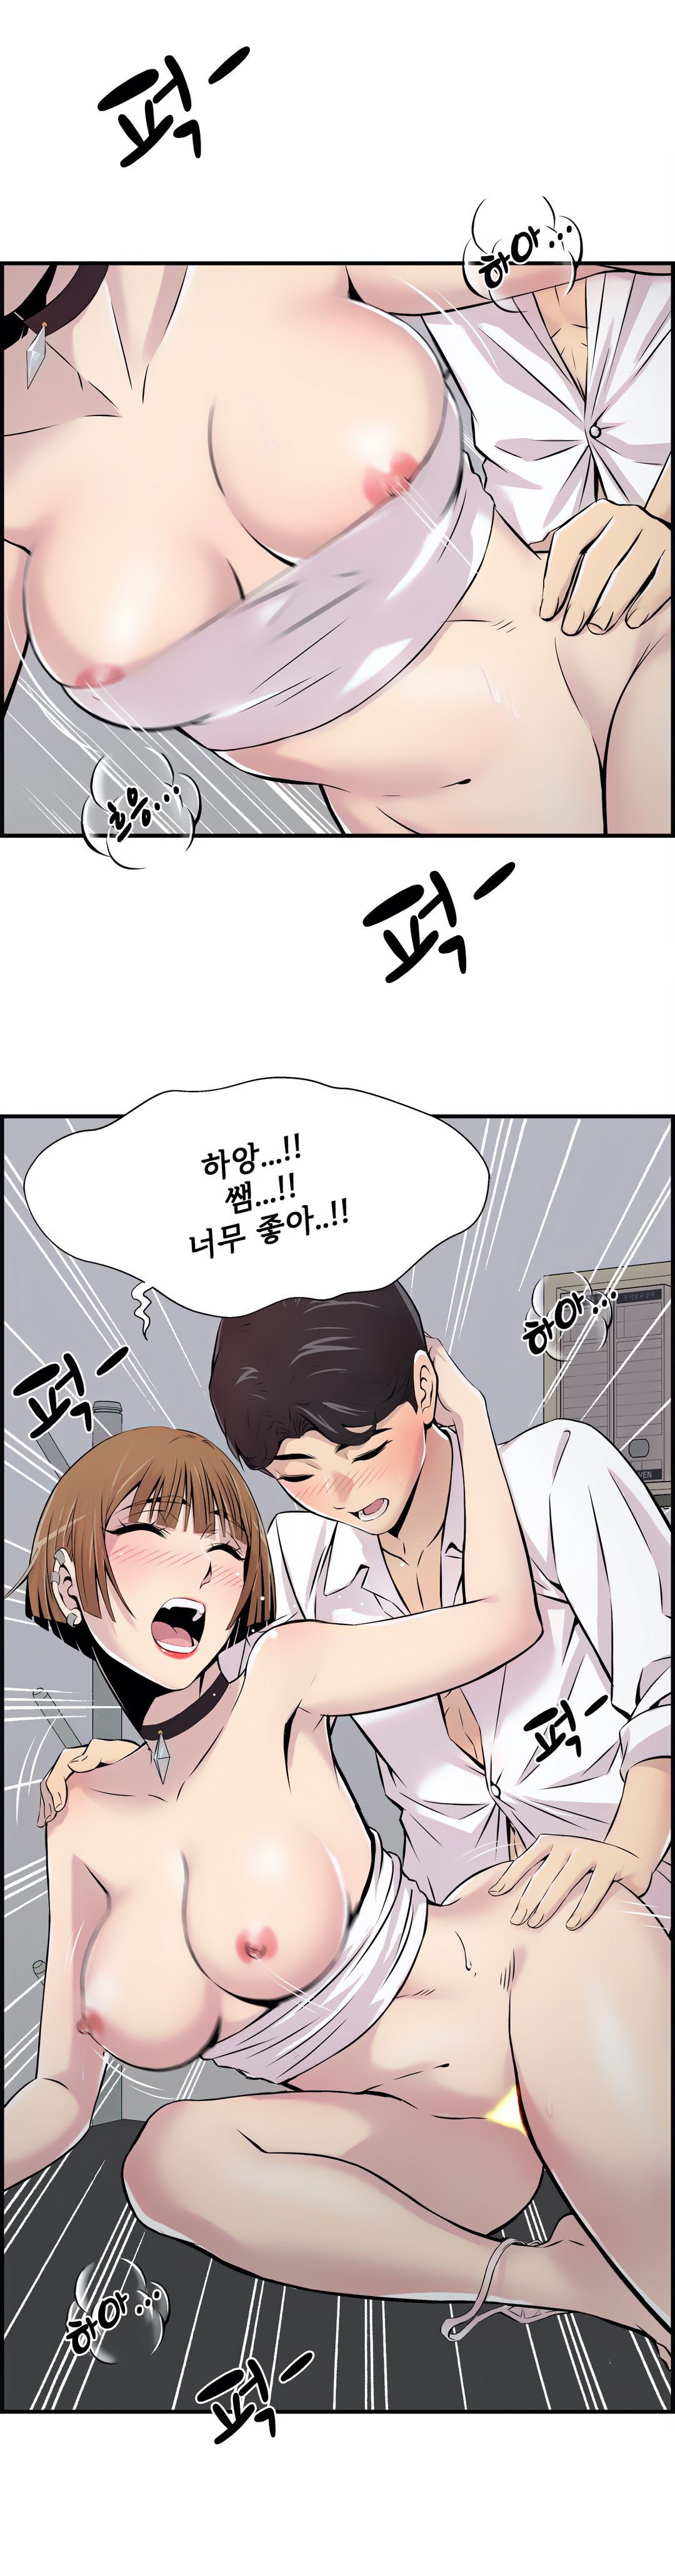 Cram School Scandal Raw - Chapter 2 Page 37